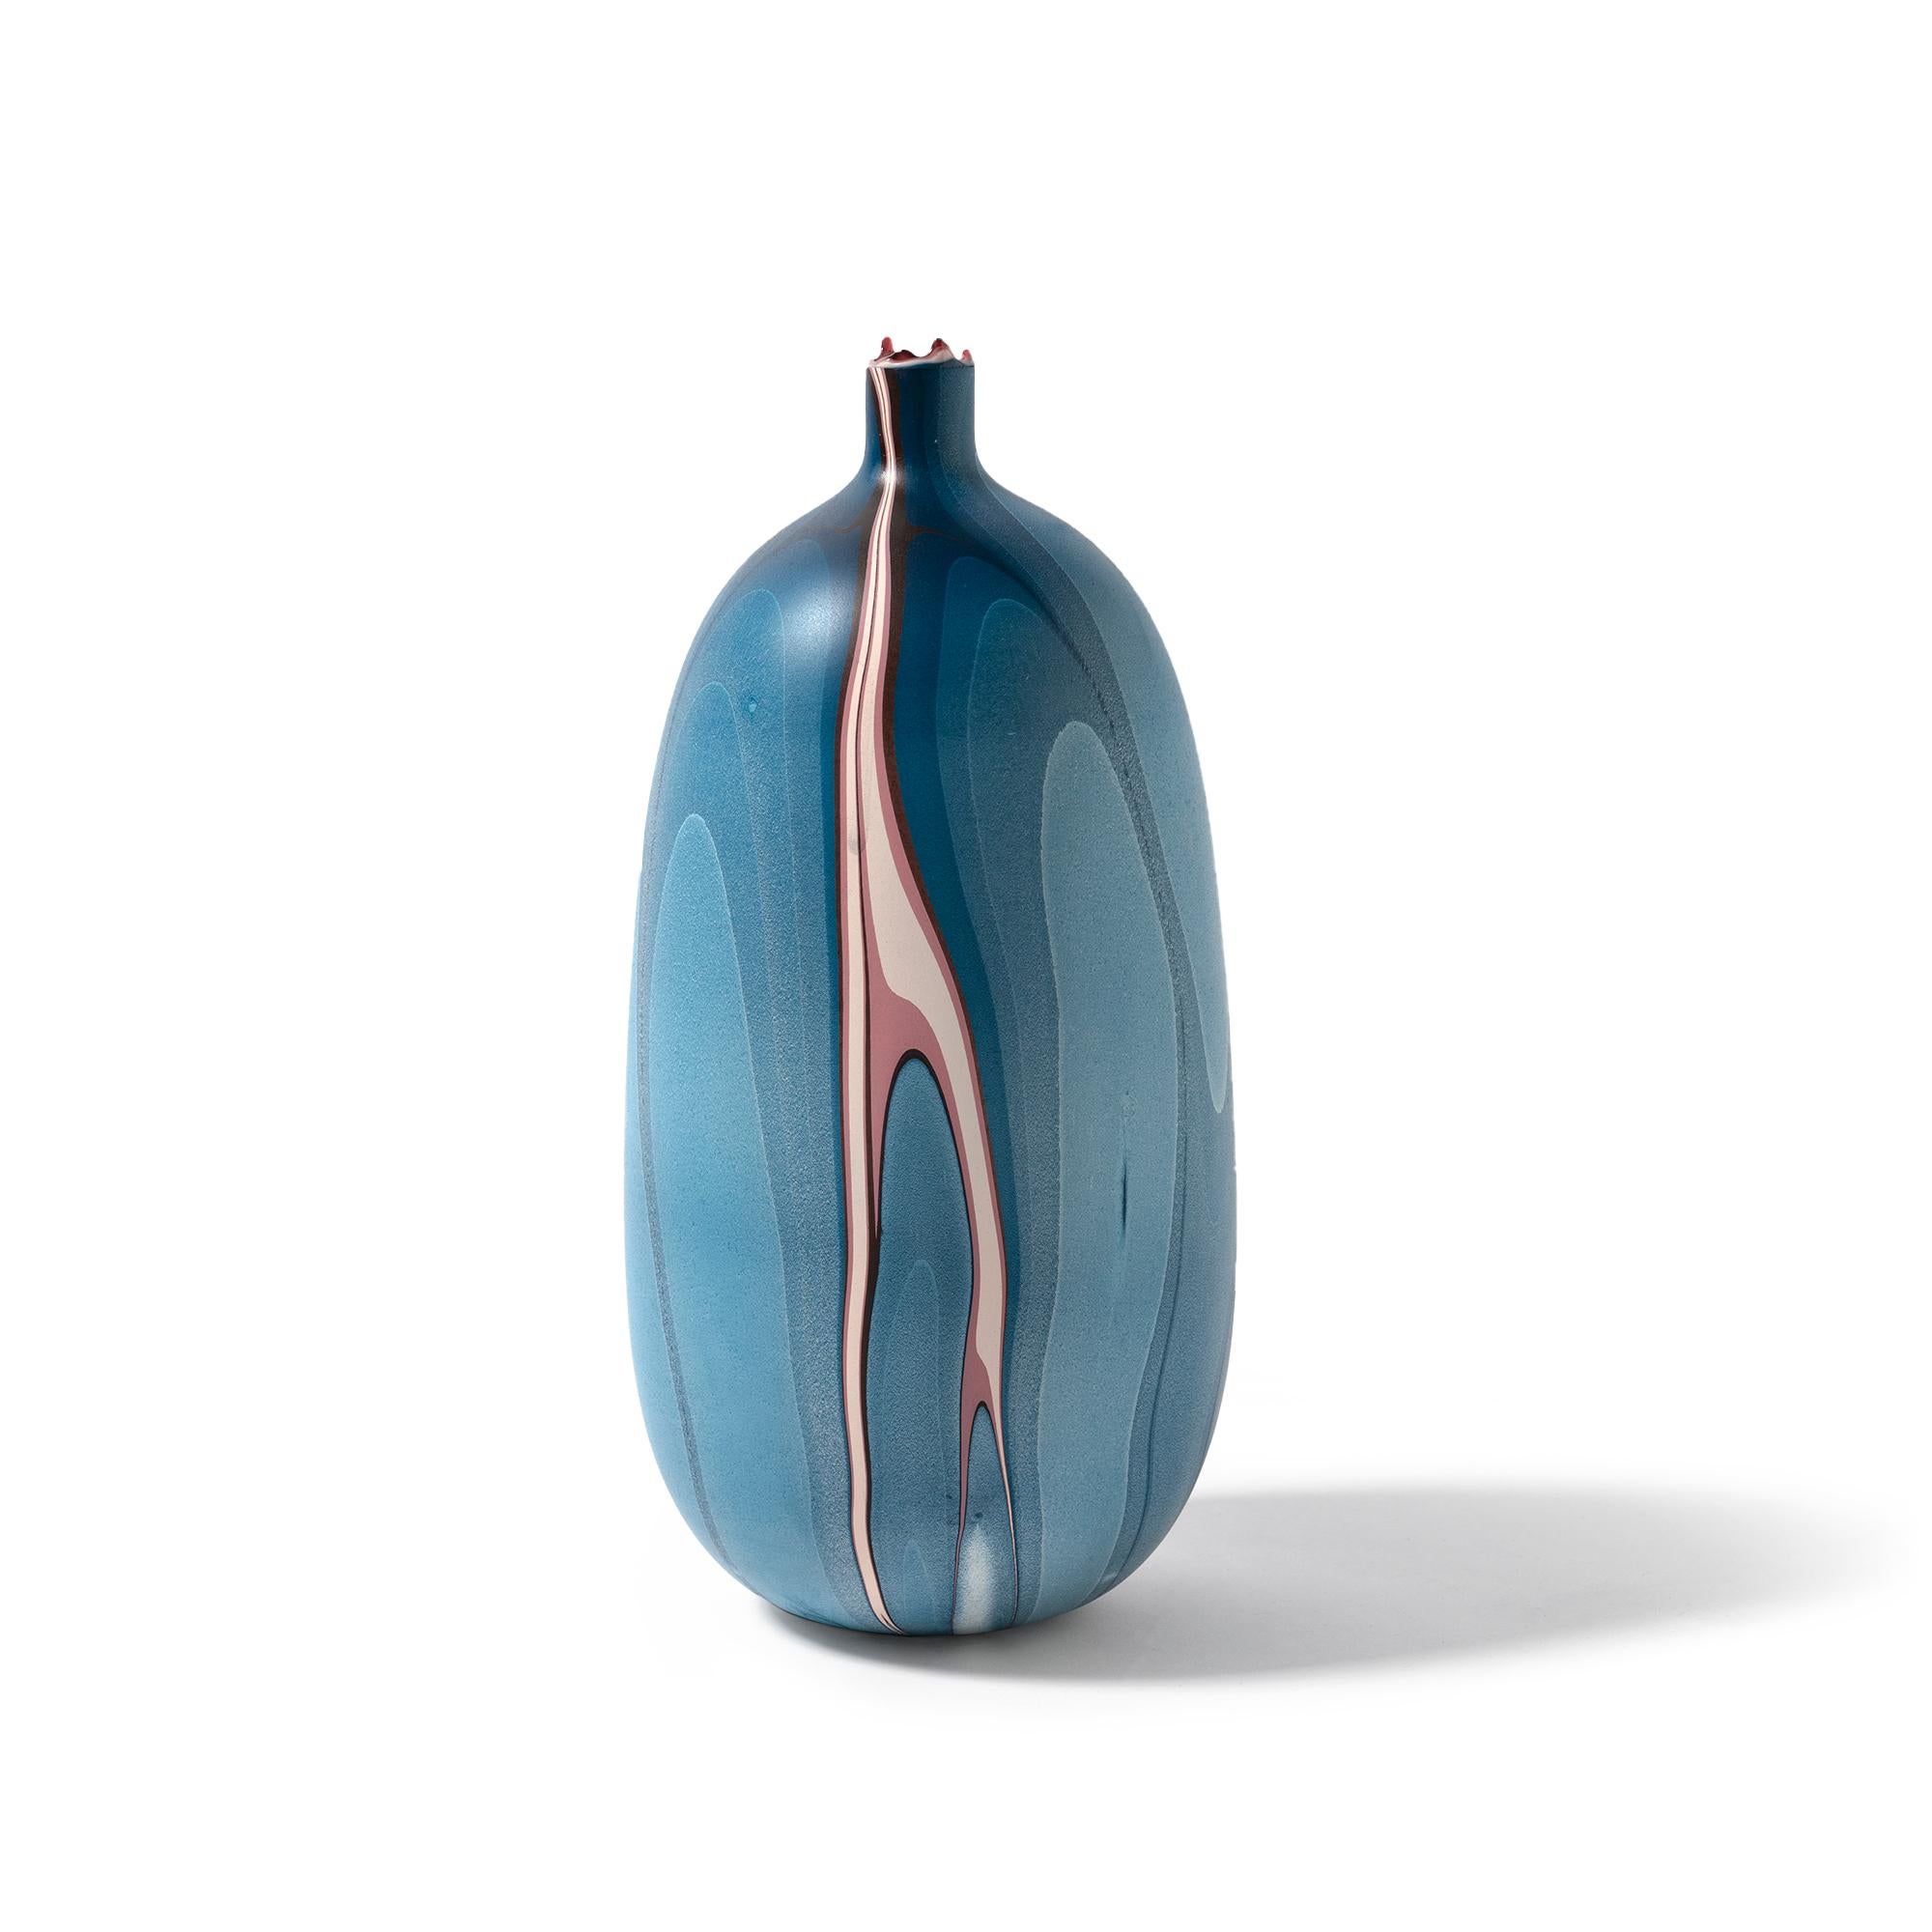 Mississippi Oblong Hydro Vase by Elyse Graham
Dimensions: W 14 x D 14 x H 29 cm
Materials: Plaster, Resin
Molded, dyed, and finished by hand in LA. Customization
Available.
All pieces are made to order.

Our new Hydro Vases take on a